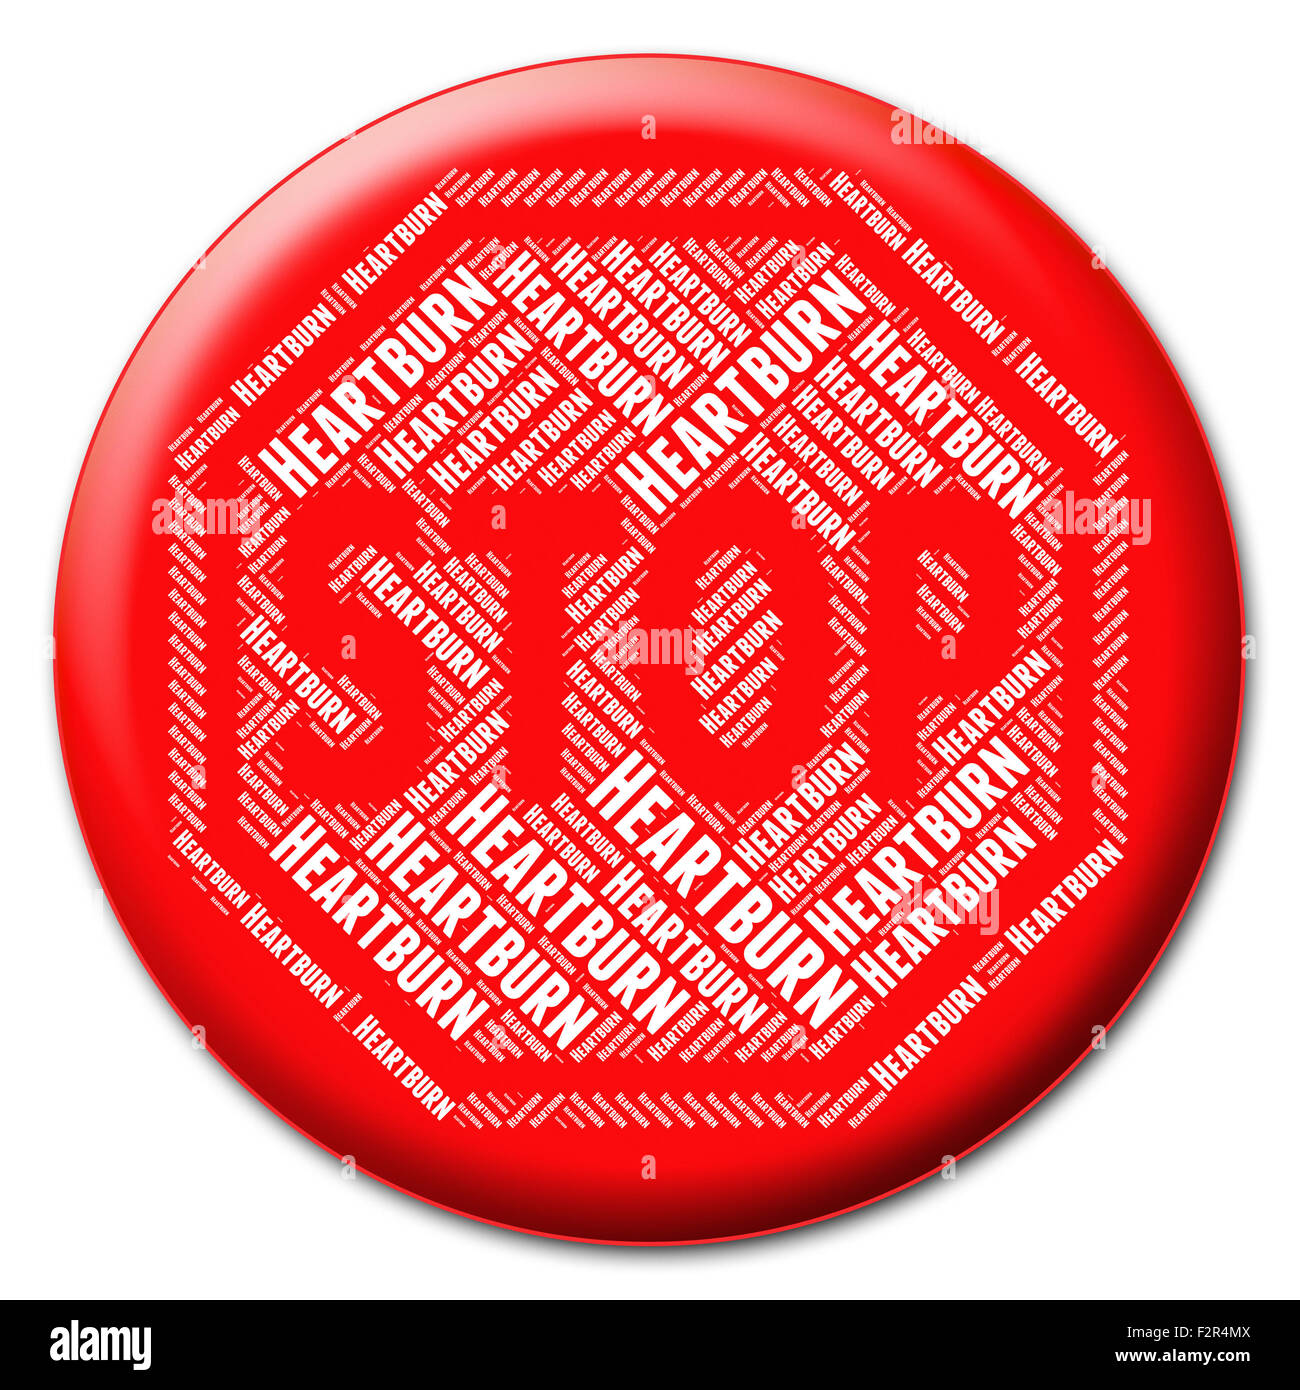 Stop Heartburn Meaning Acid Indigestion And Caution Stock Photo